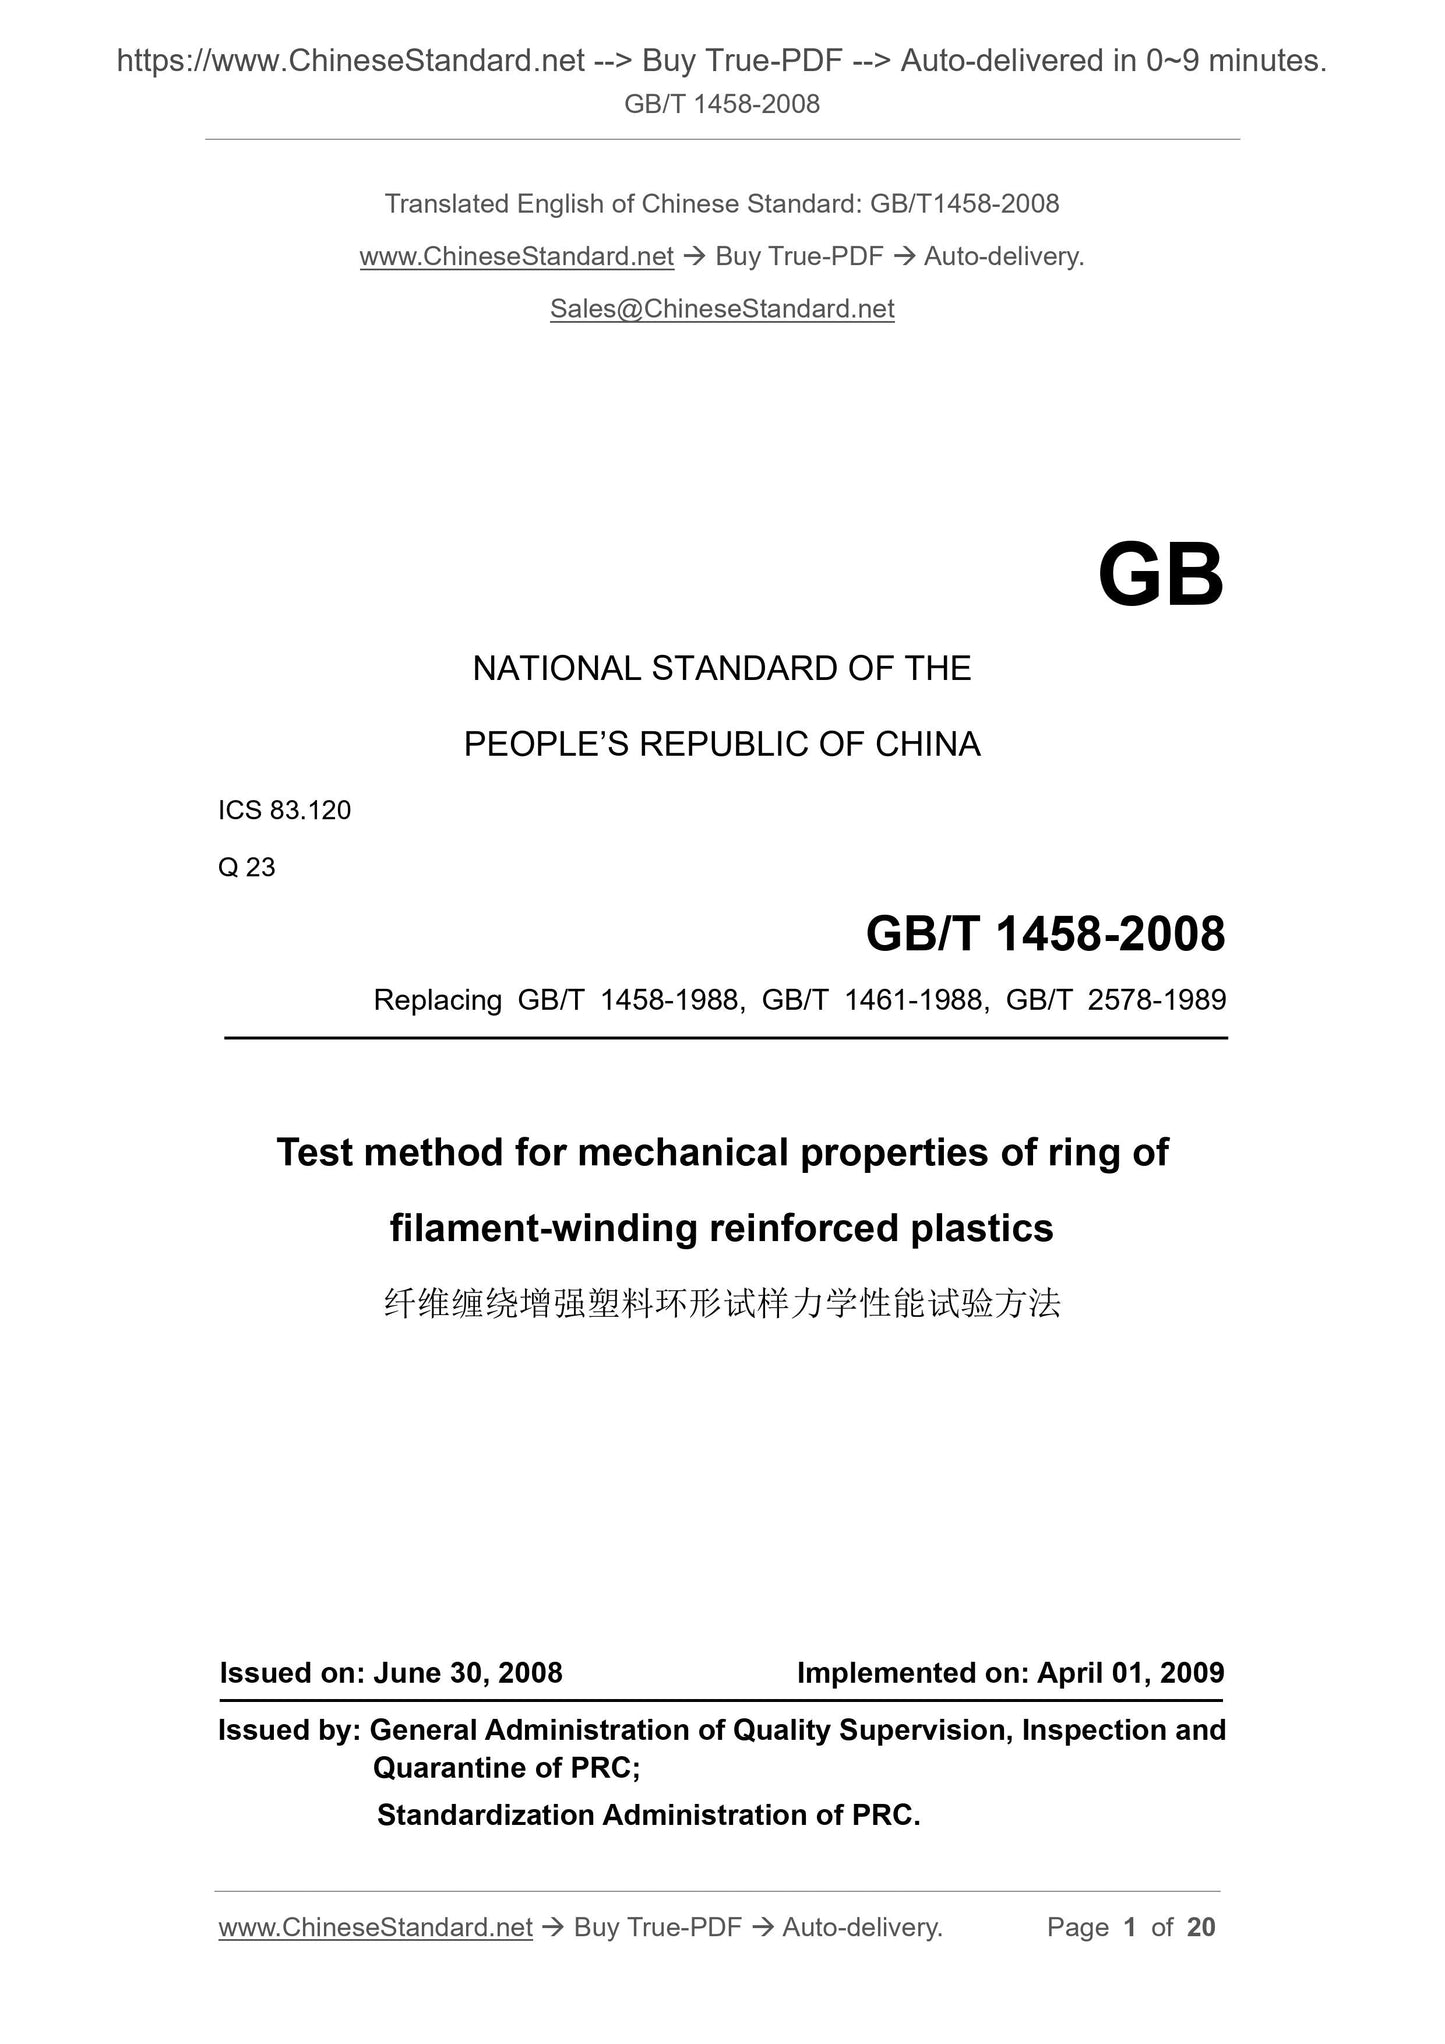 GB/T 1458-2008 Page 1